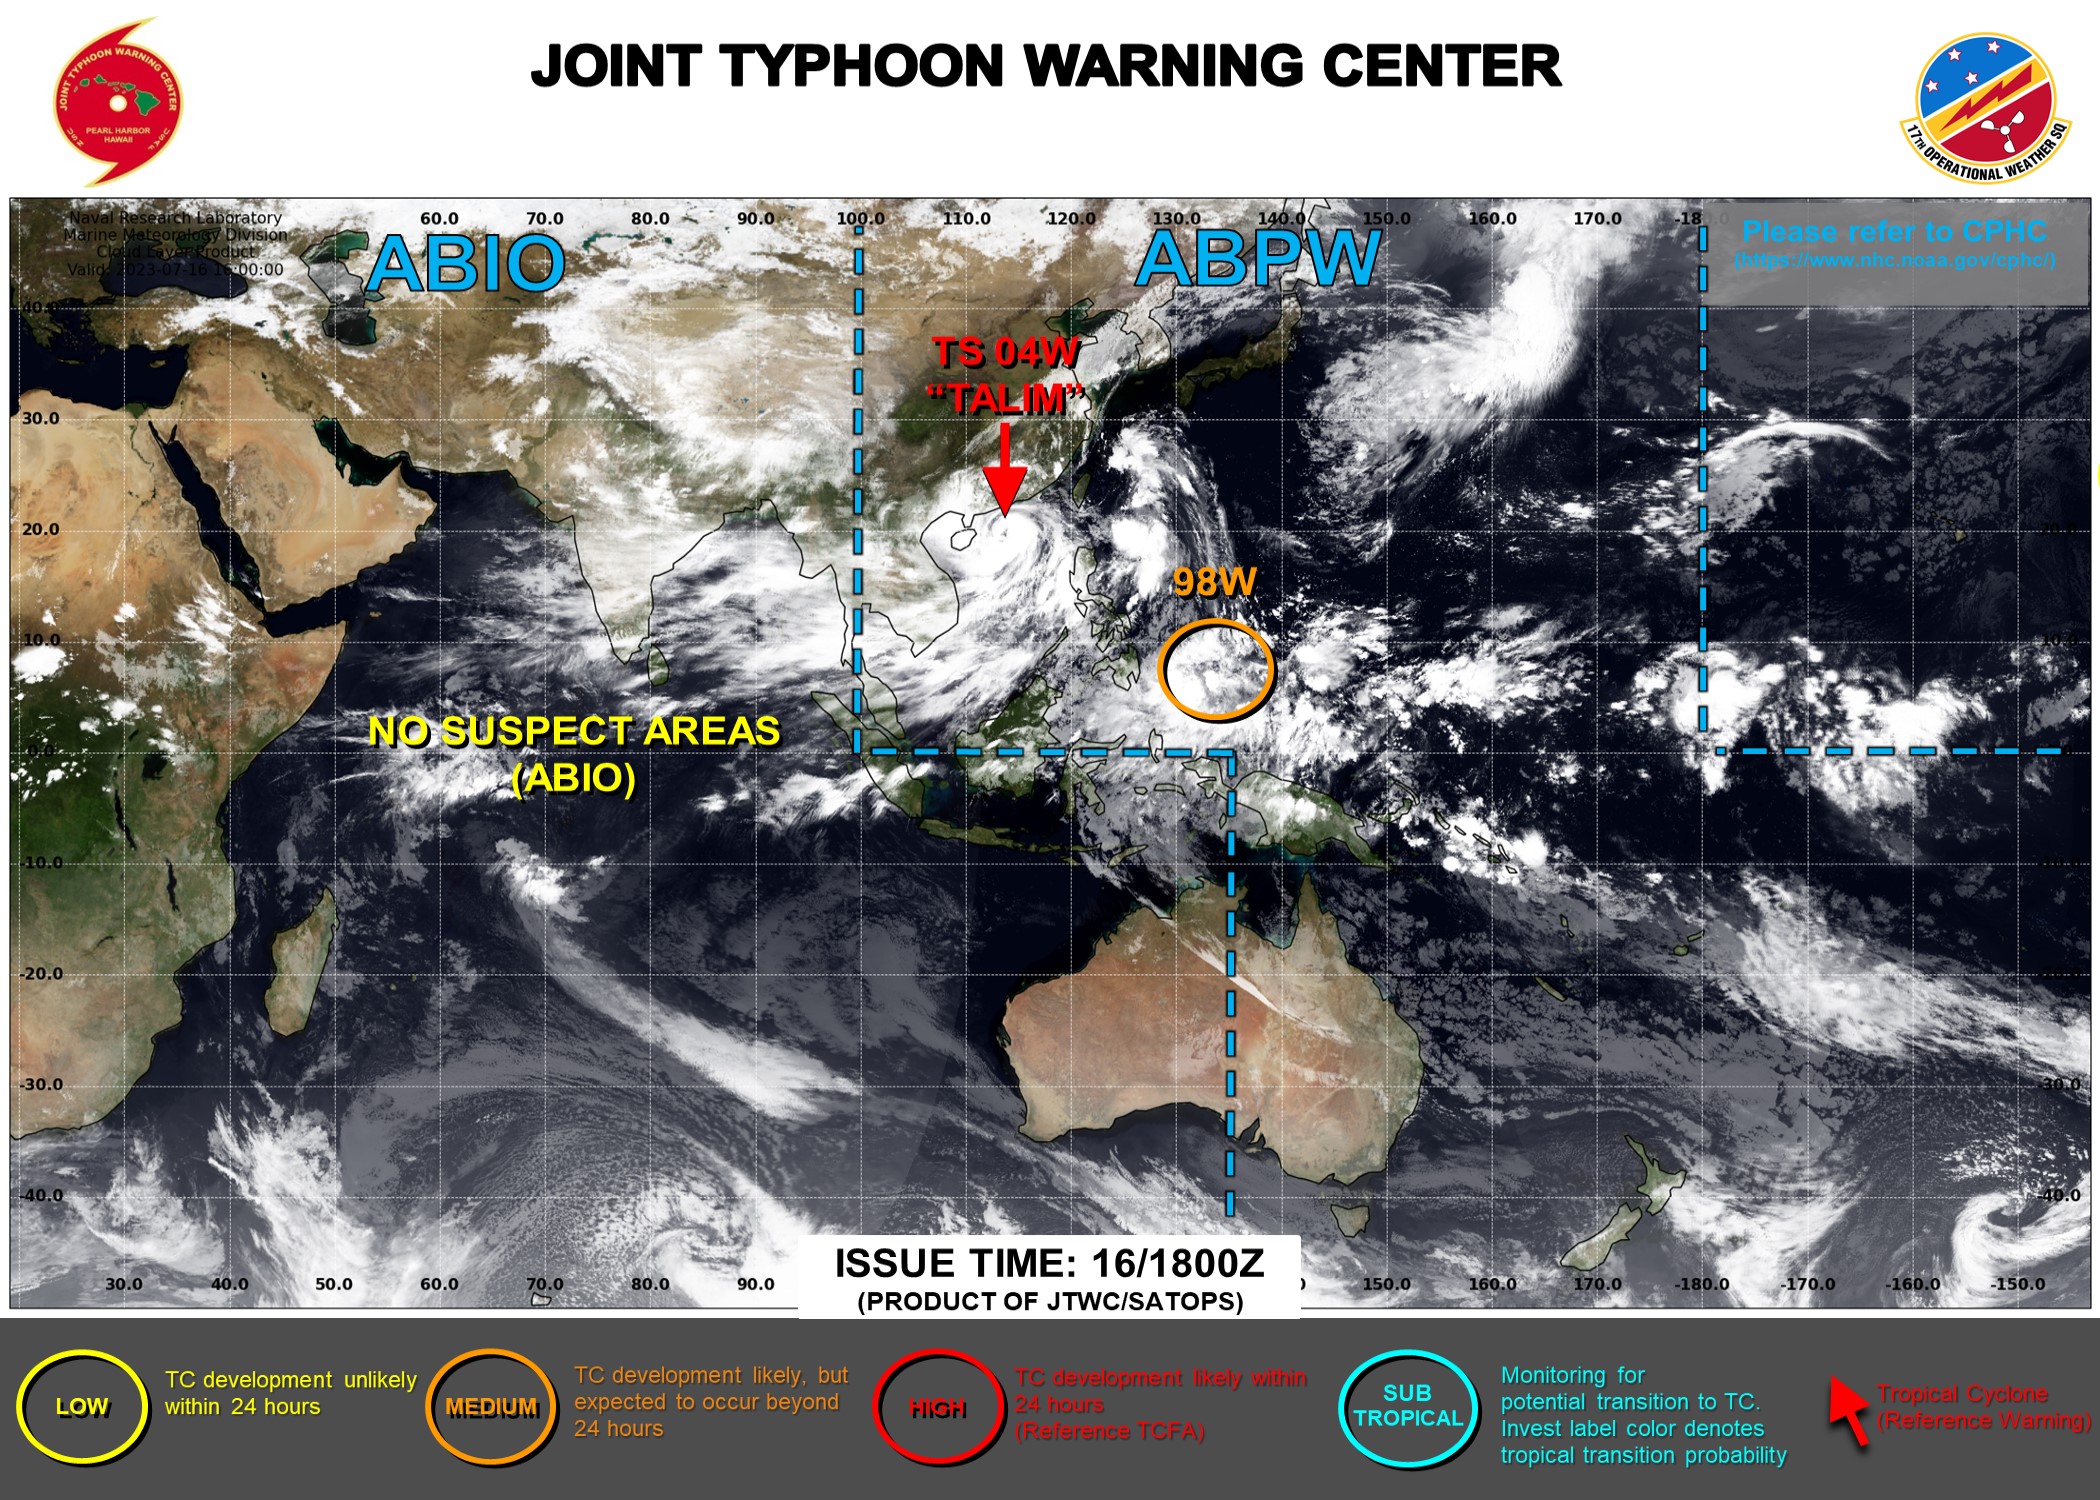 JTWC IS ISSUING 6HOURLY WARNINGS AND 3HOURLY SATELLITE BULLETINS ON TY 04W(TALIM).